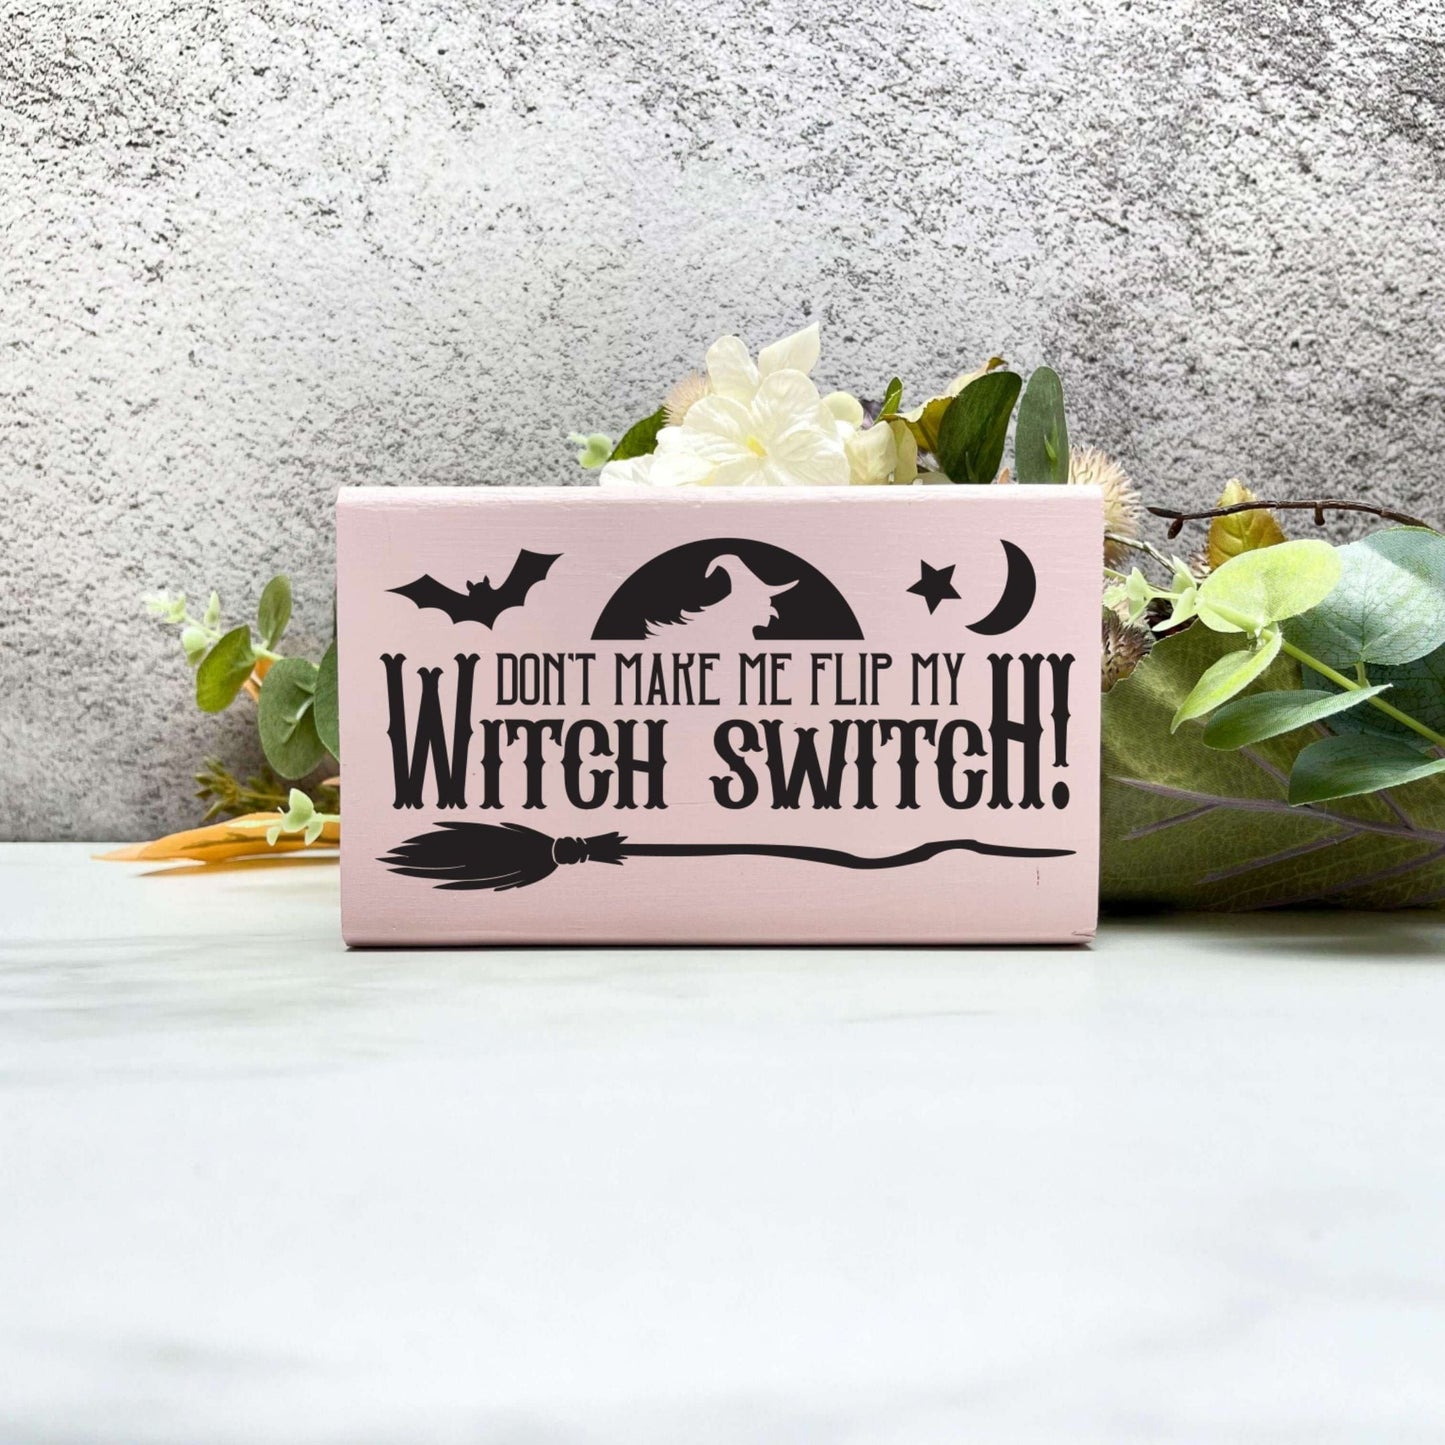 Don't make me flip my witch switch wood Sign, Halloween Wood Sign, Halloween Home Decor, Spooky Decor